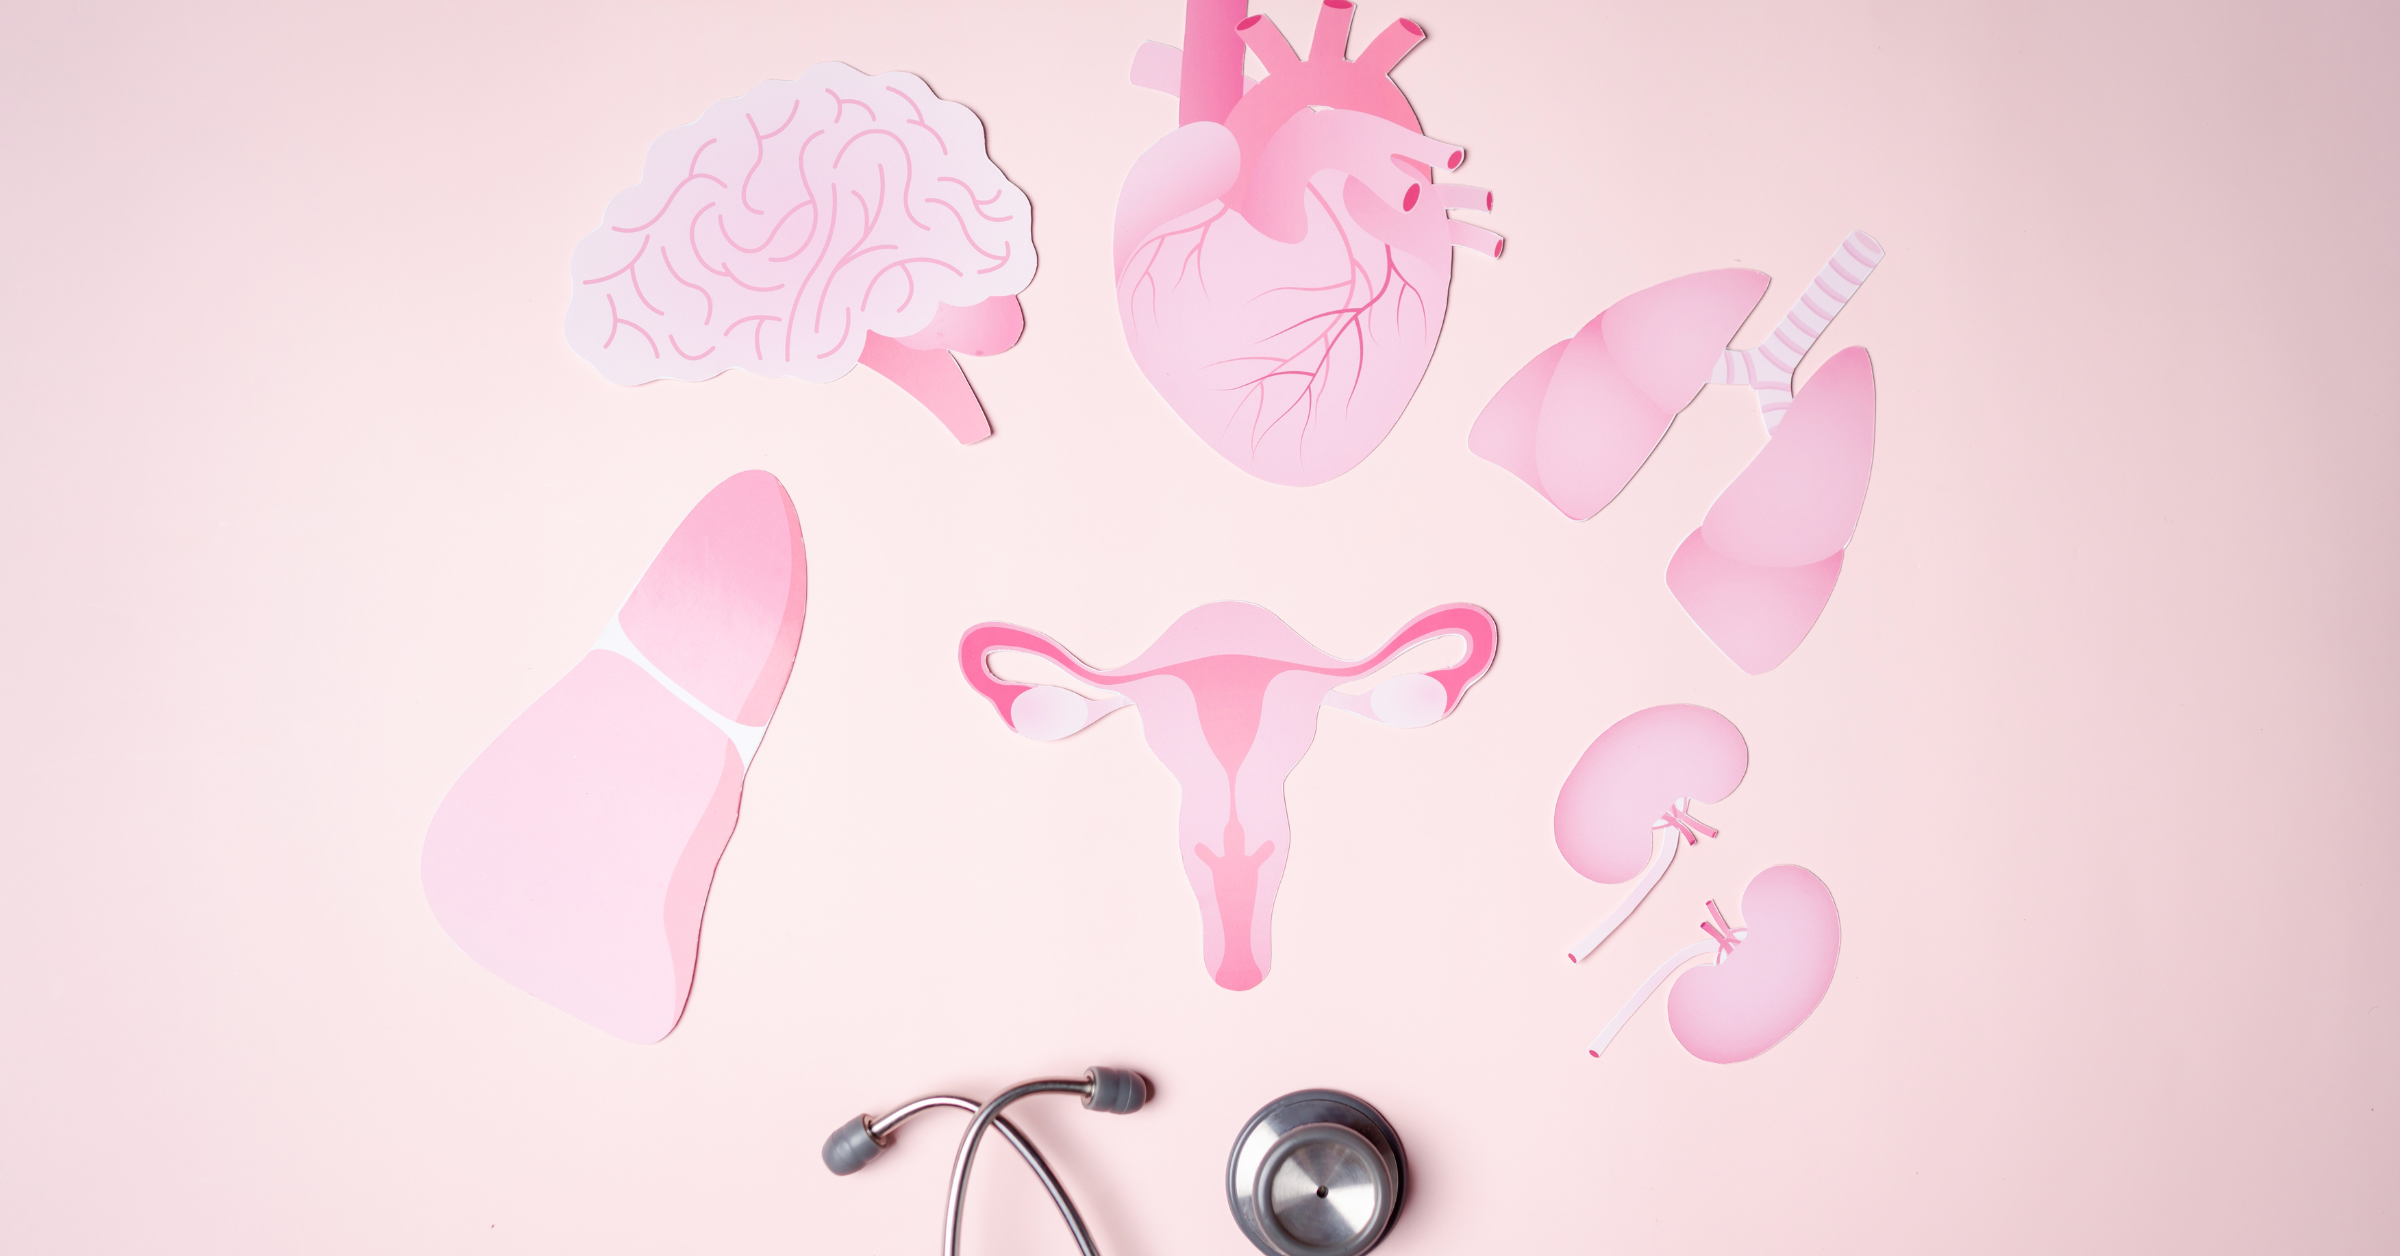 An image of femal reproductive system in pink color